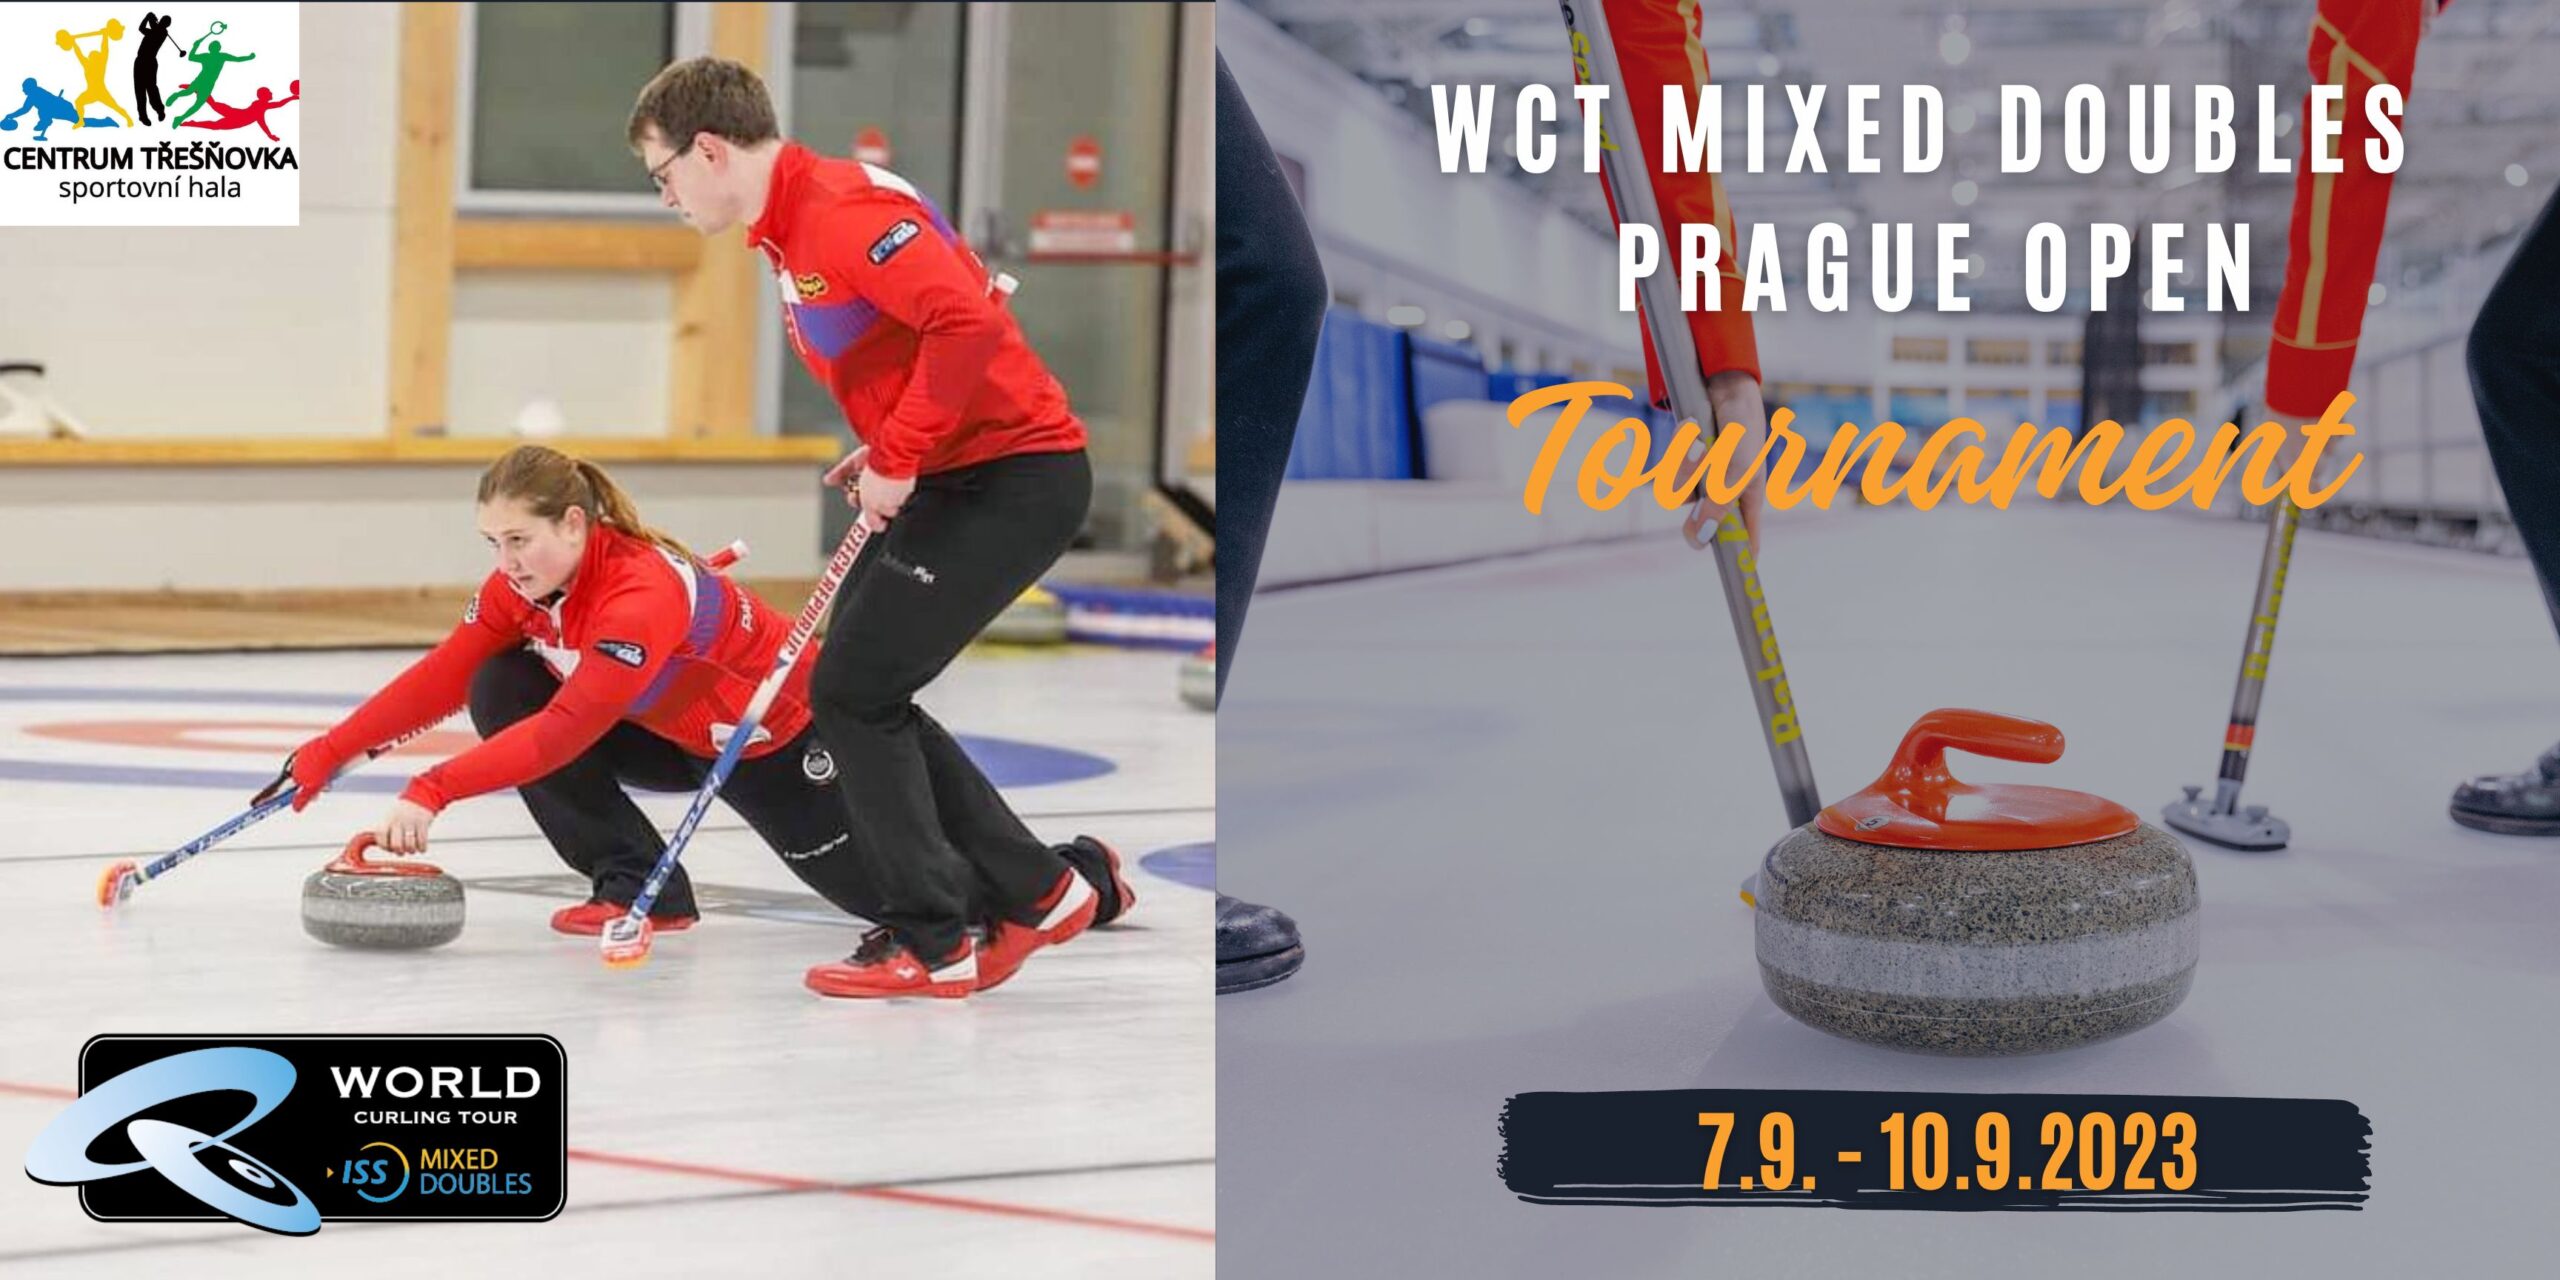 WCT mixed doubles